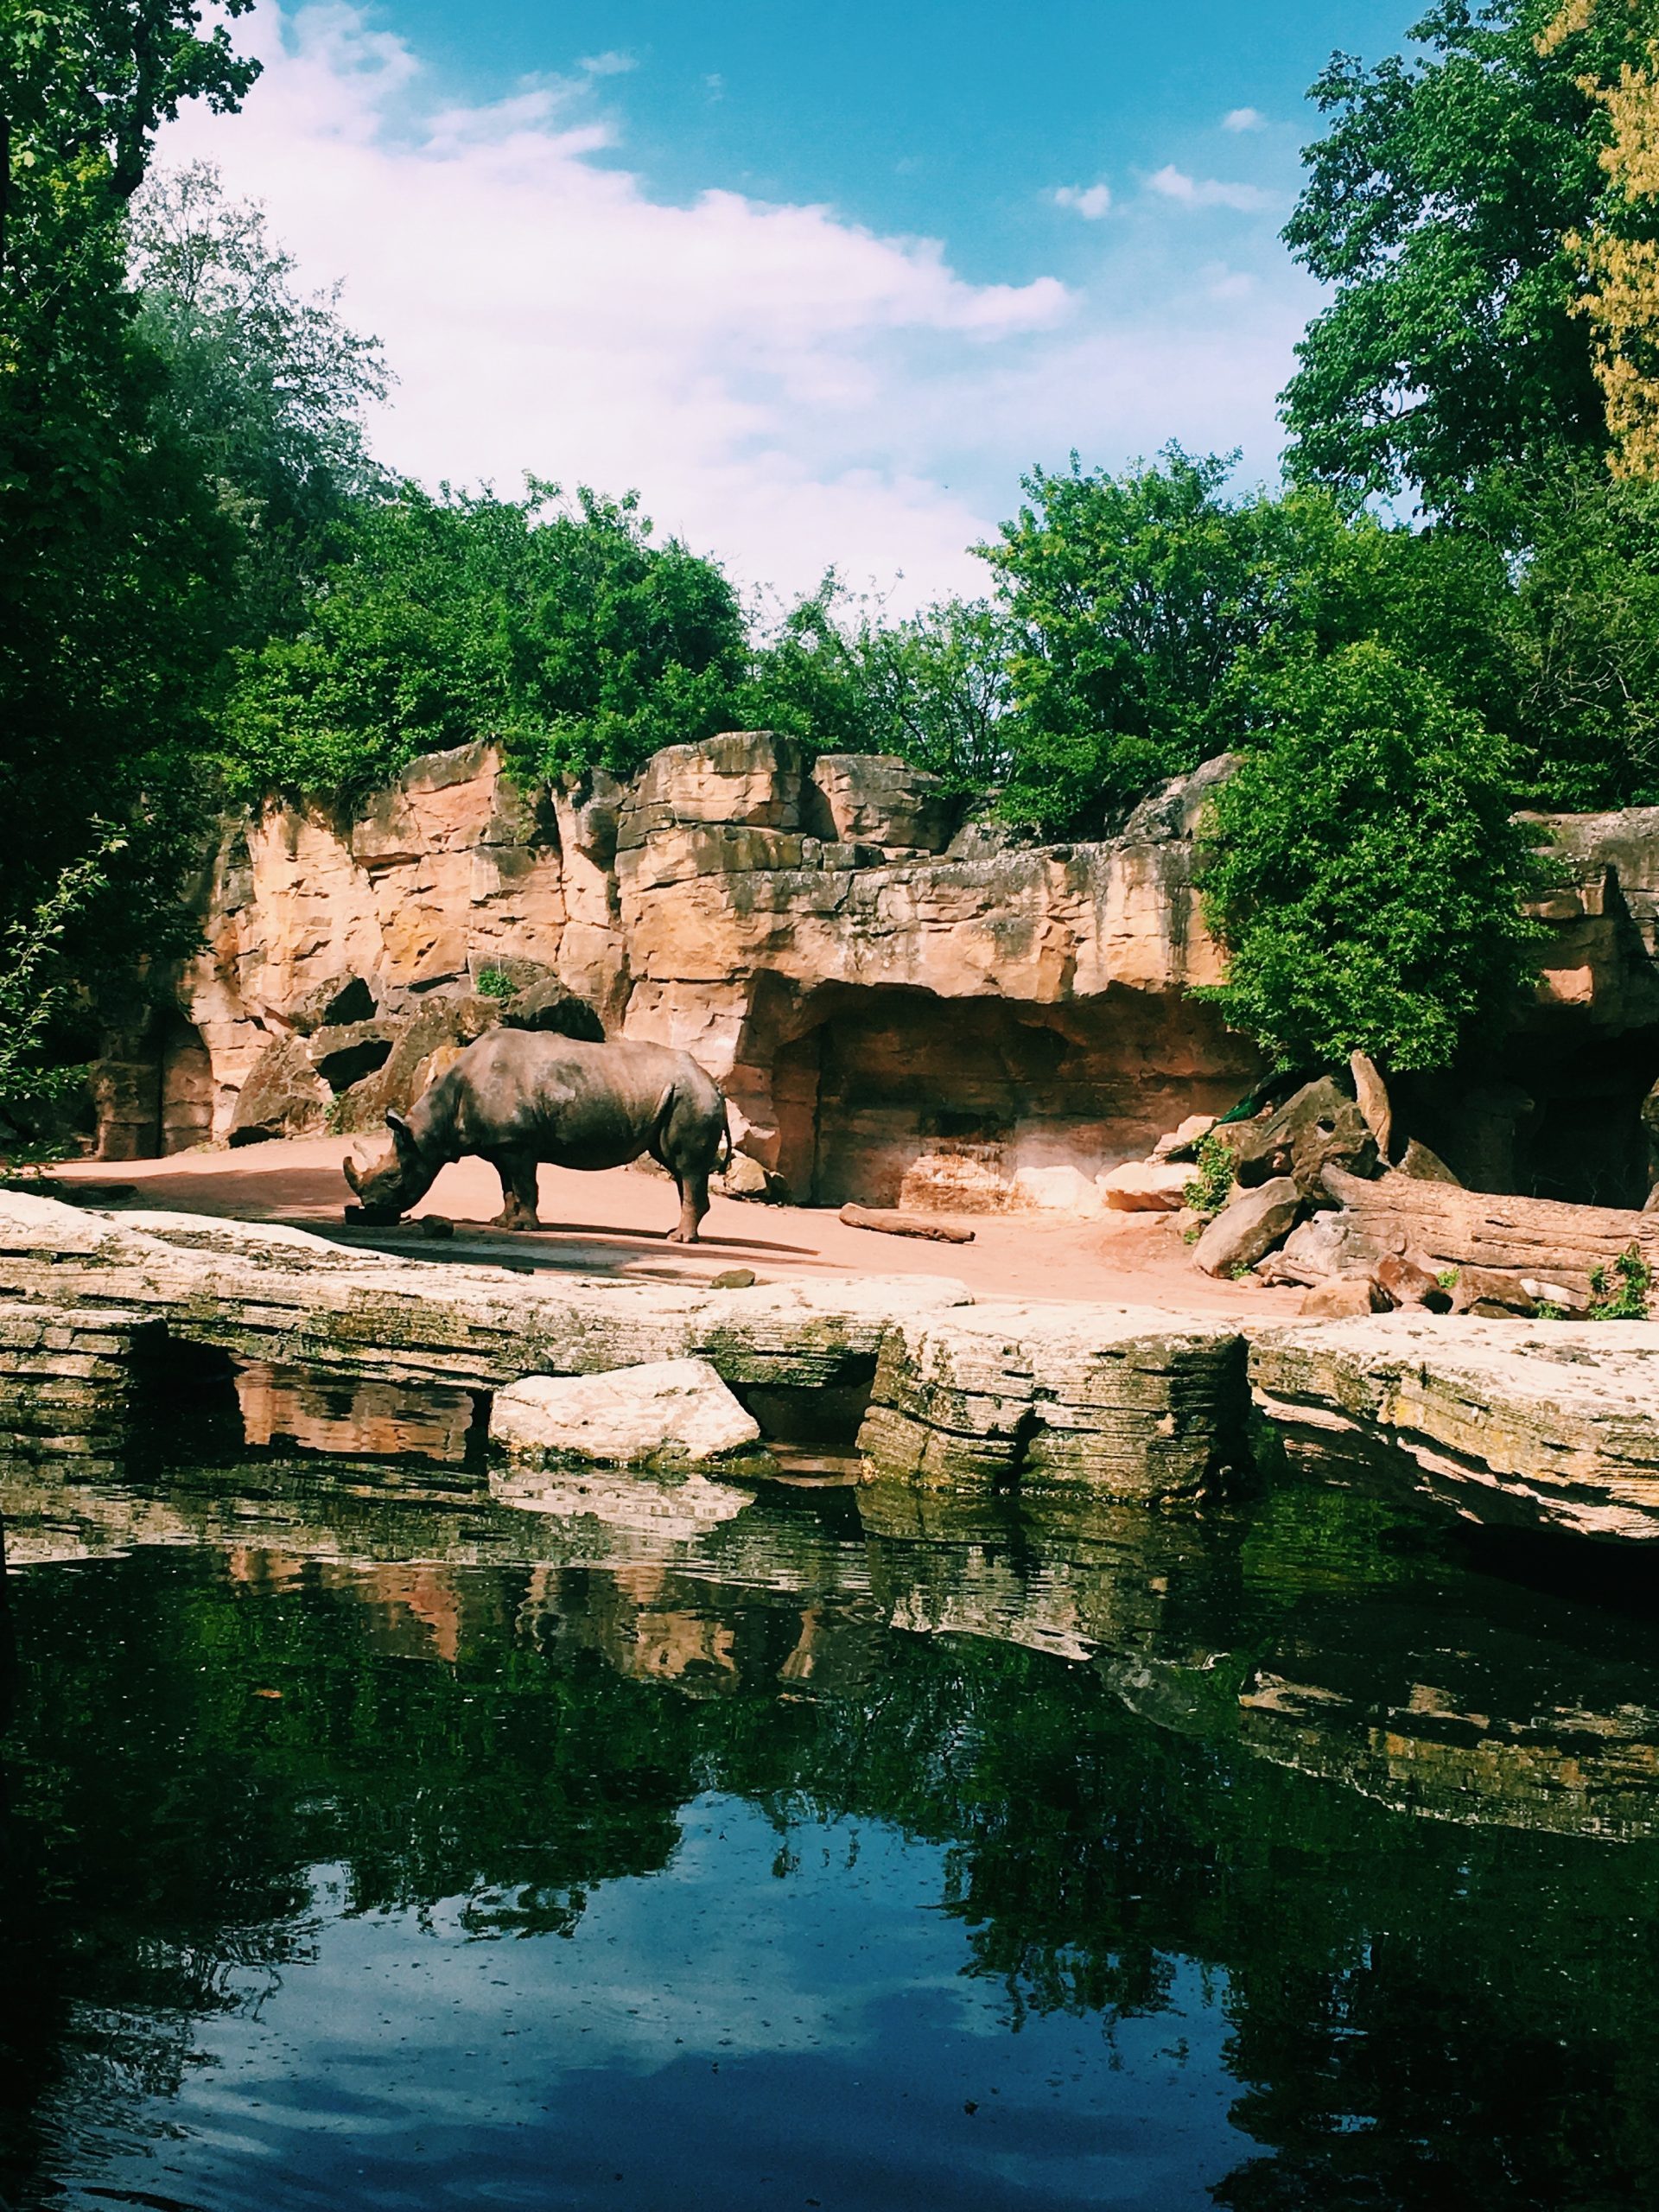 5 Best Aquariums And Zoos In Fort Worth